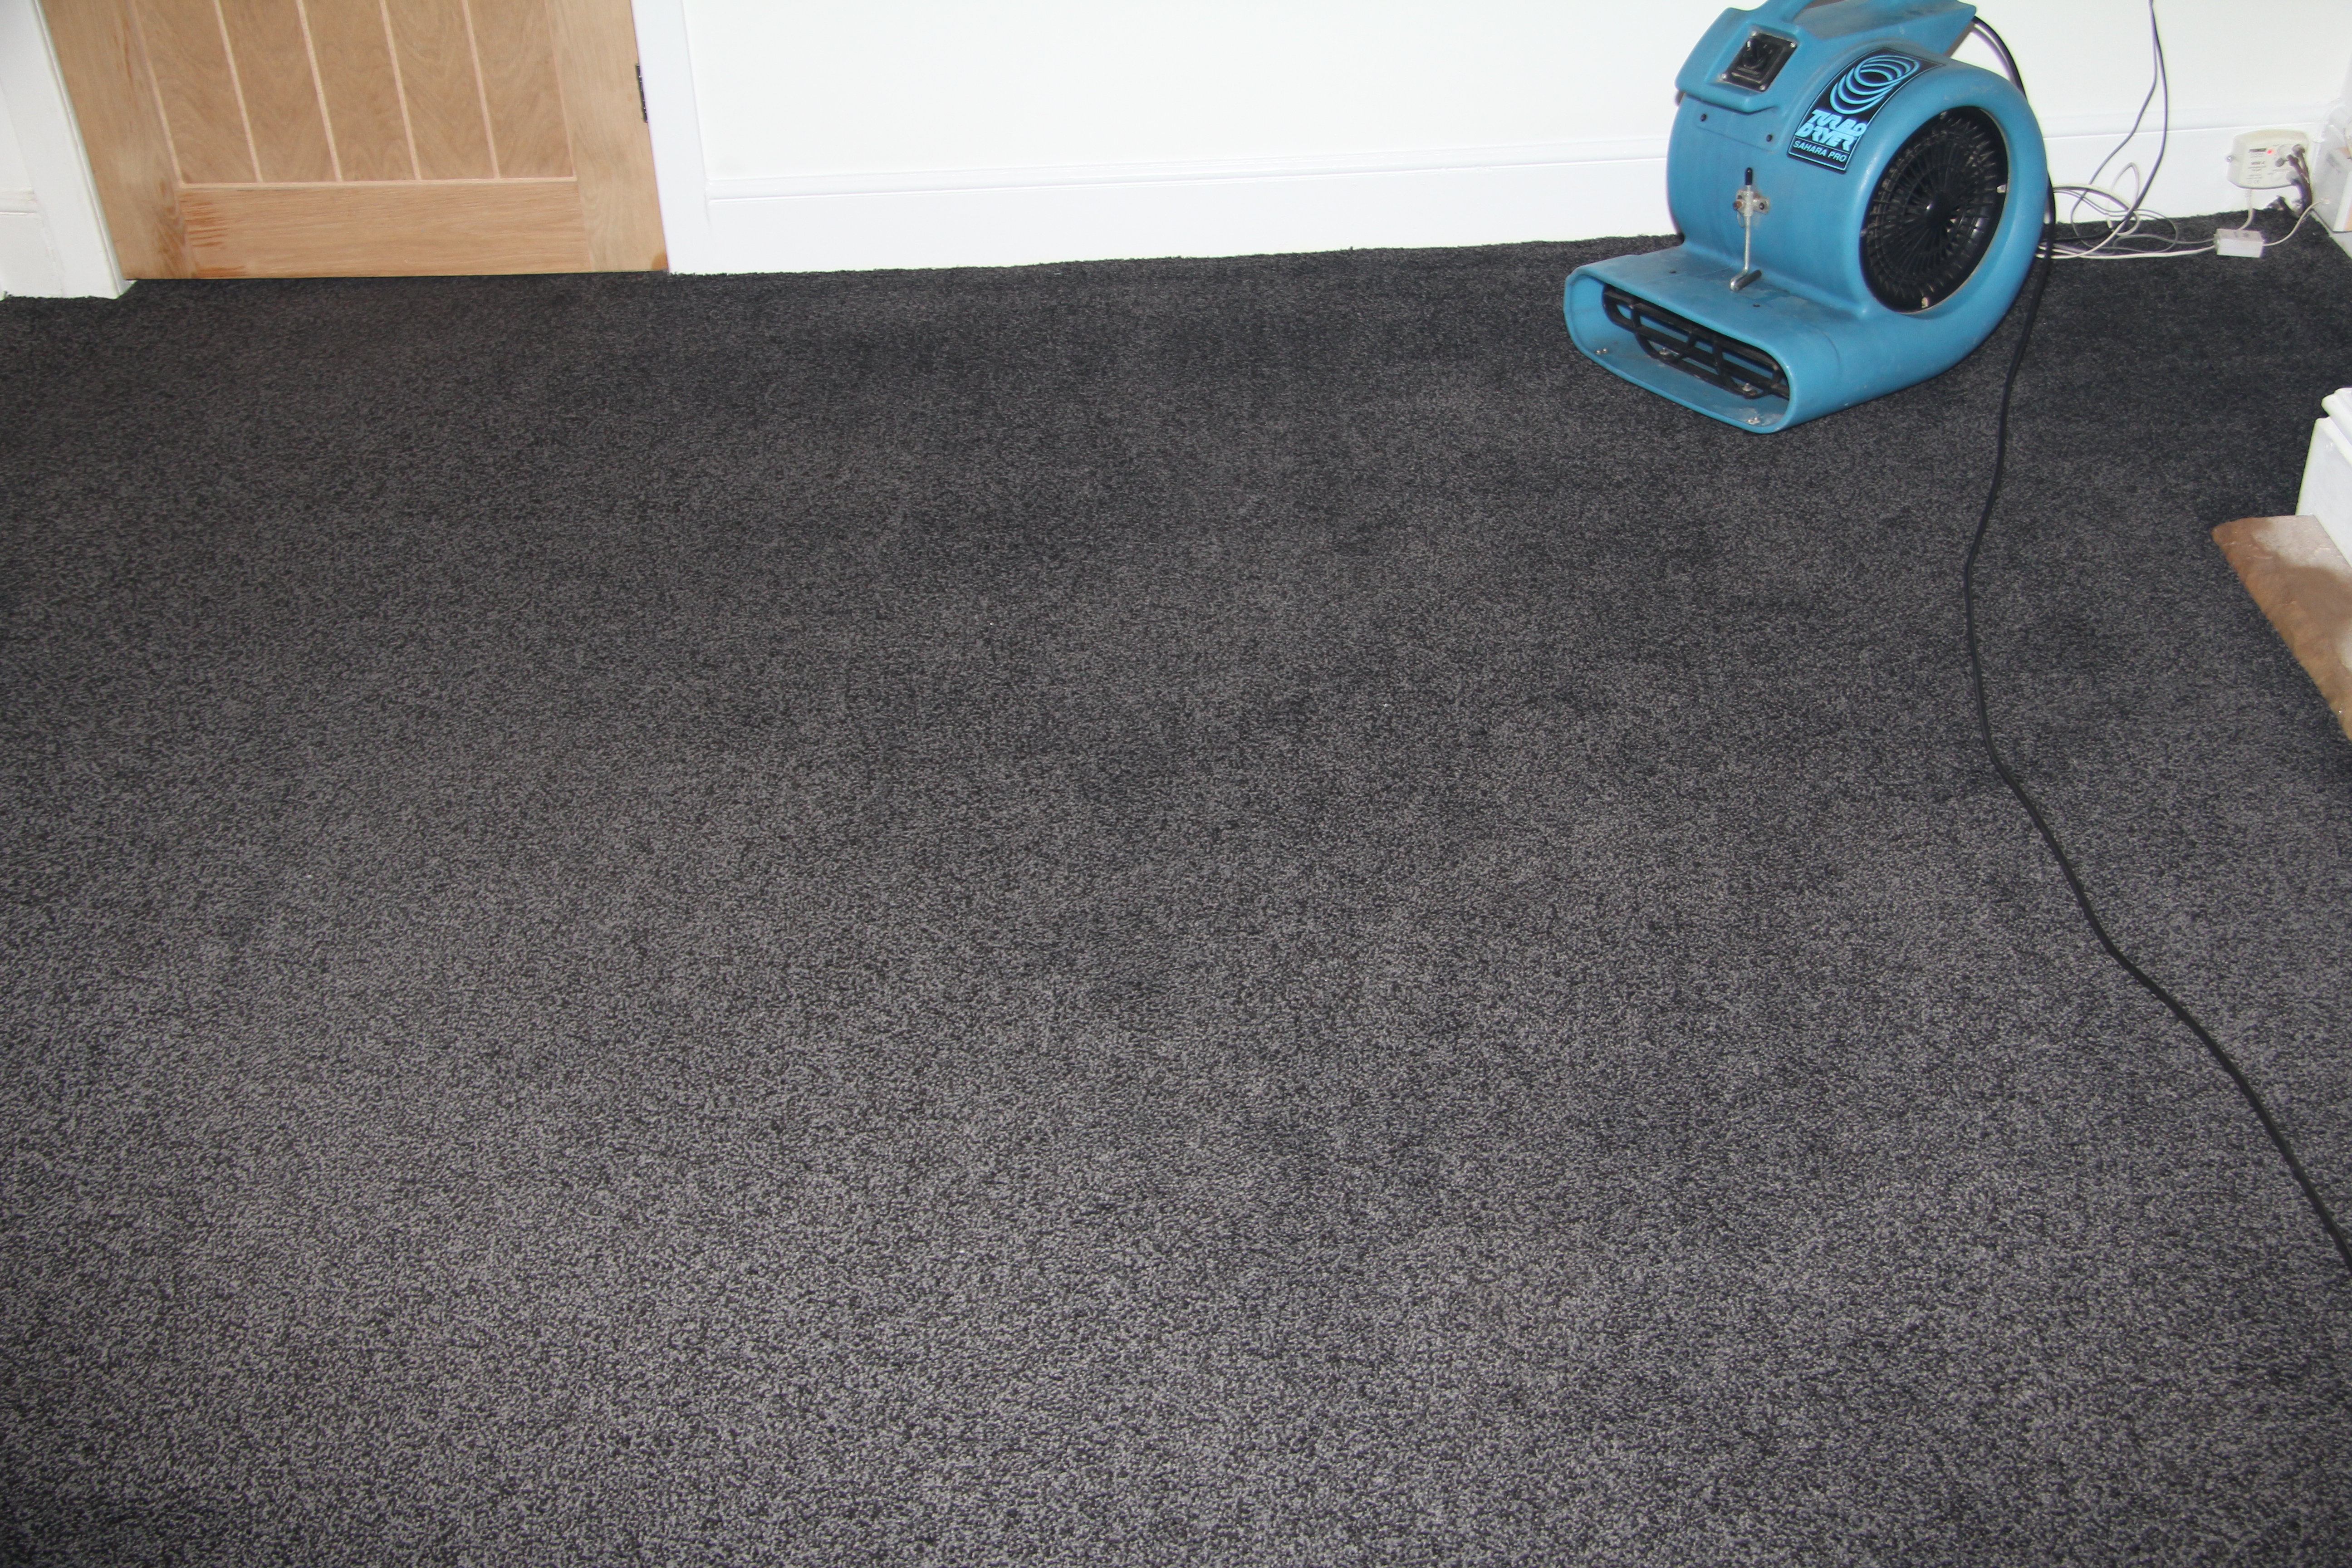 Hard Floor Cleaning - Midgley Carpet and Upholstery Cleaning